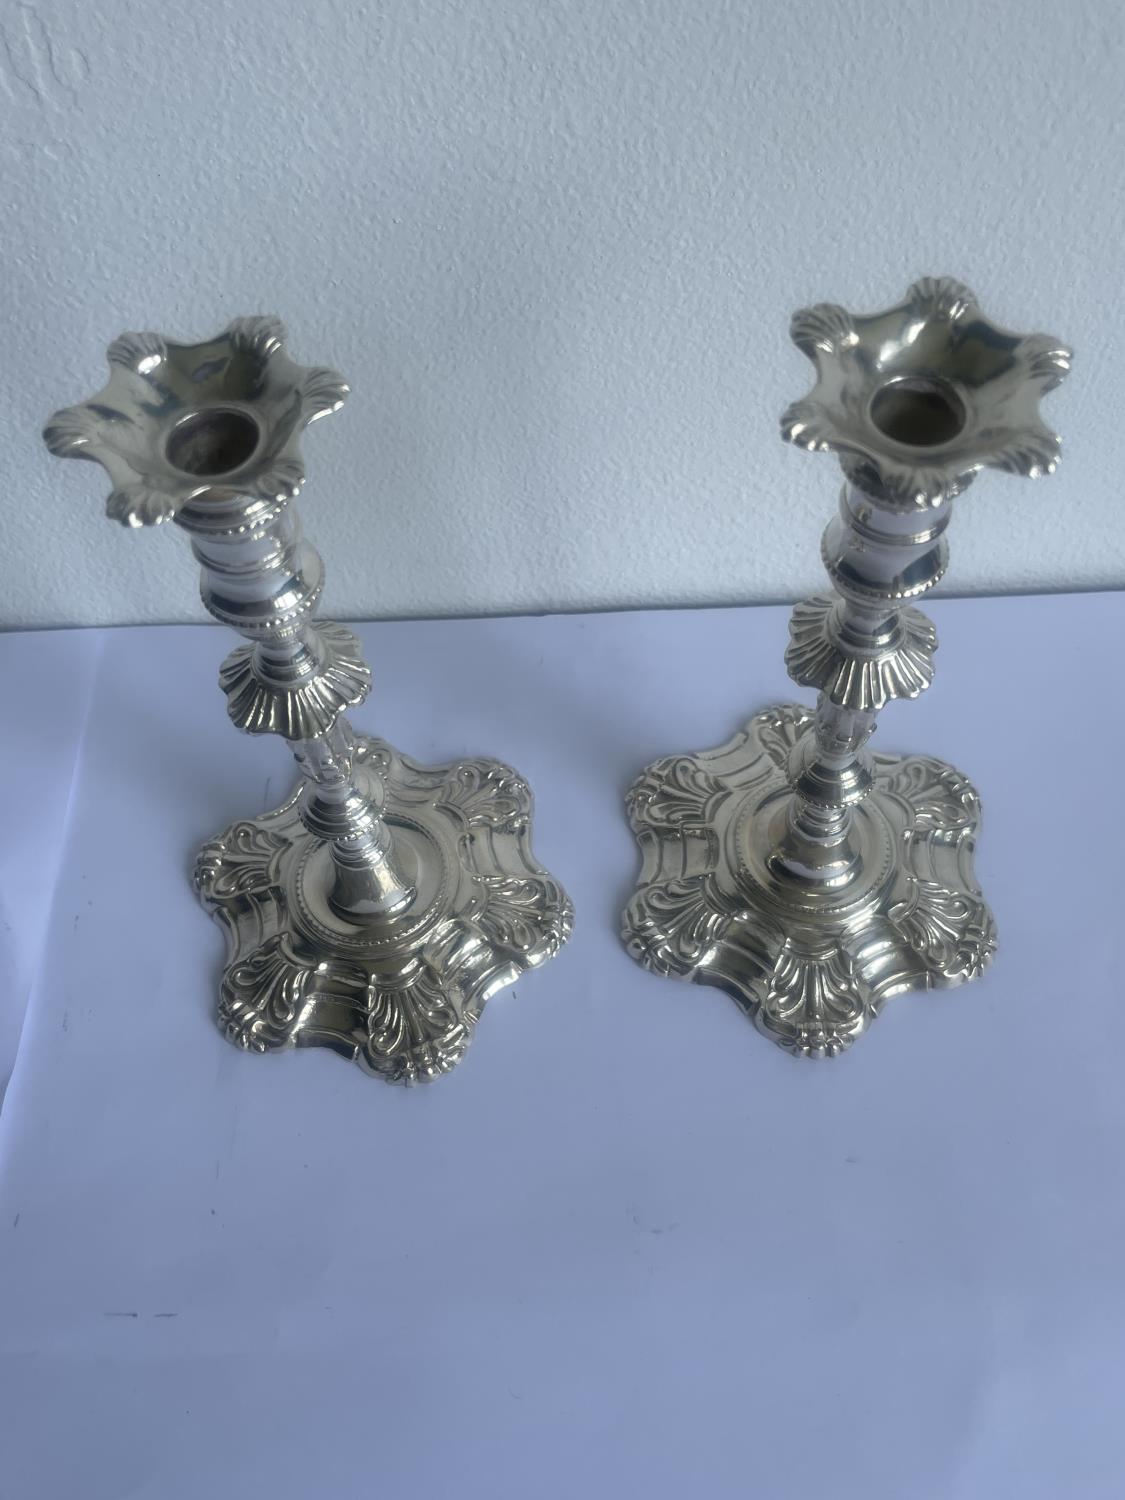 A PAIR OF DECORATIVE HALLMARKED BIRMINGHAM SILVER CANDLESTICKS GROSS WEIGHT 450 GRAMS - Image 2 of 6